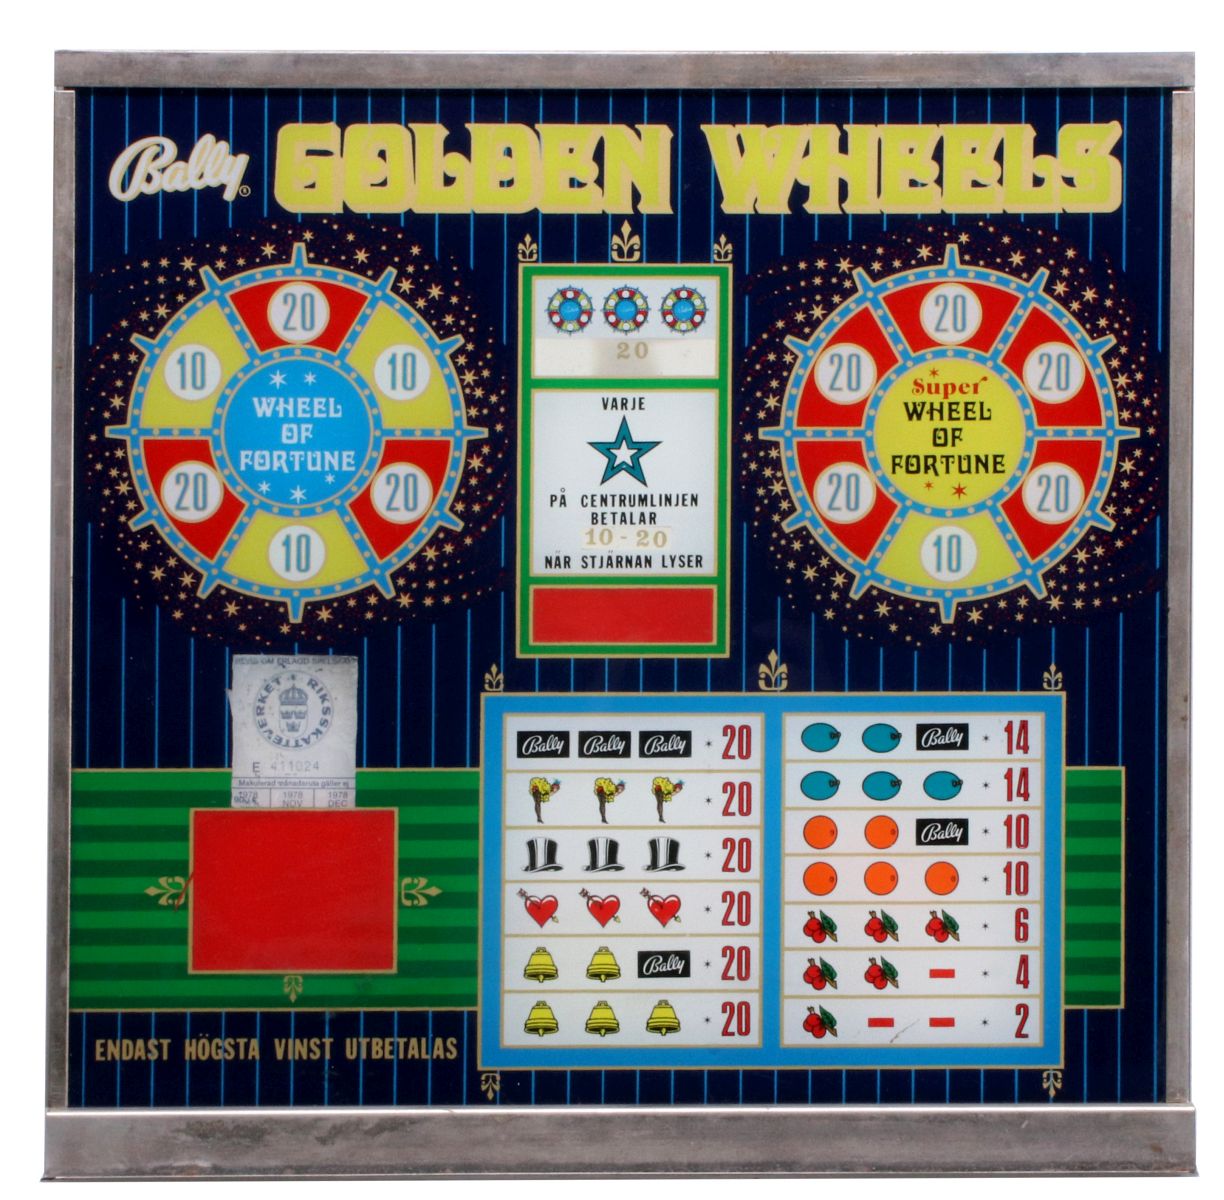 A VINTAGE BALLY WHEEL OF FORTUNE GAME FRONT